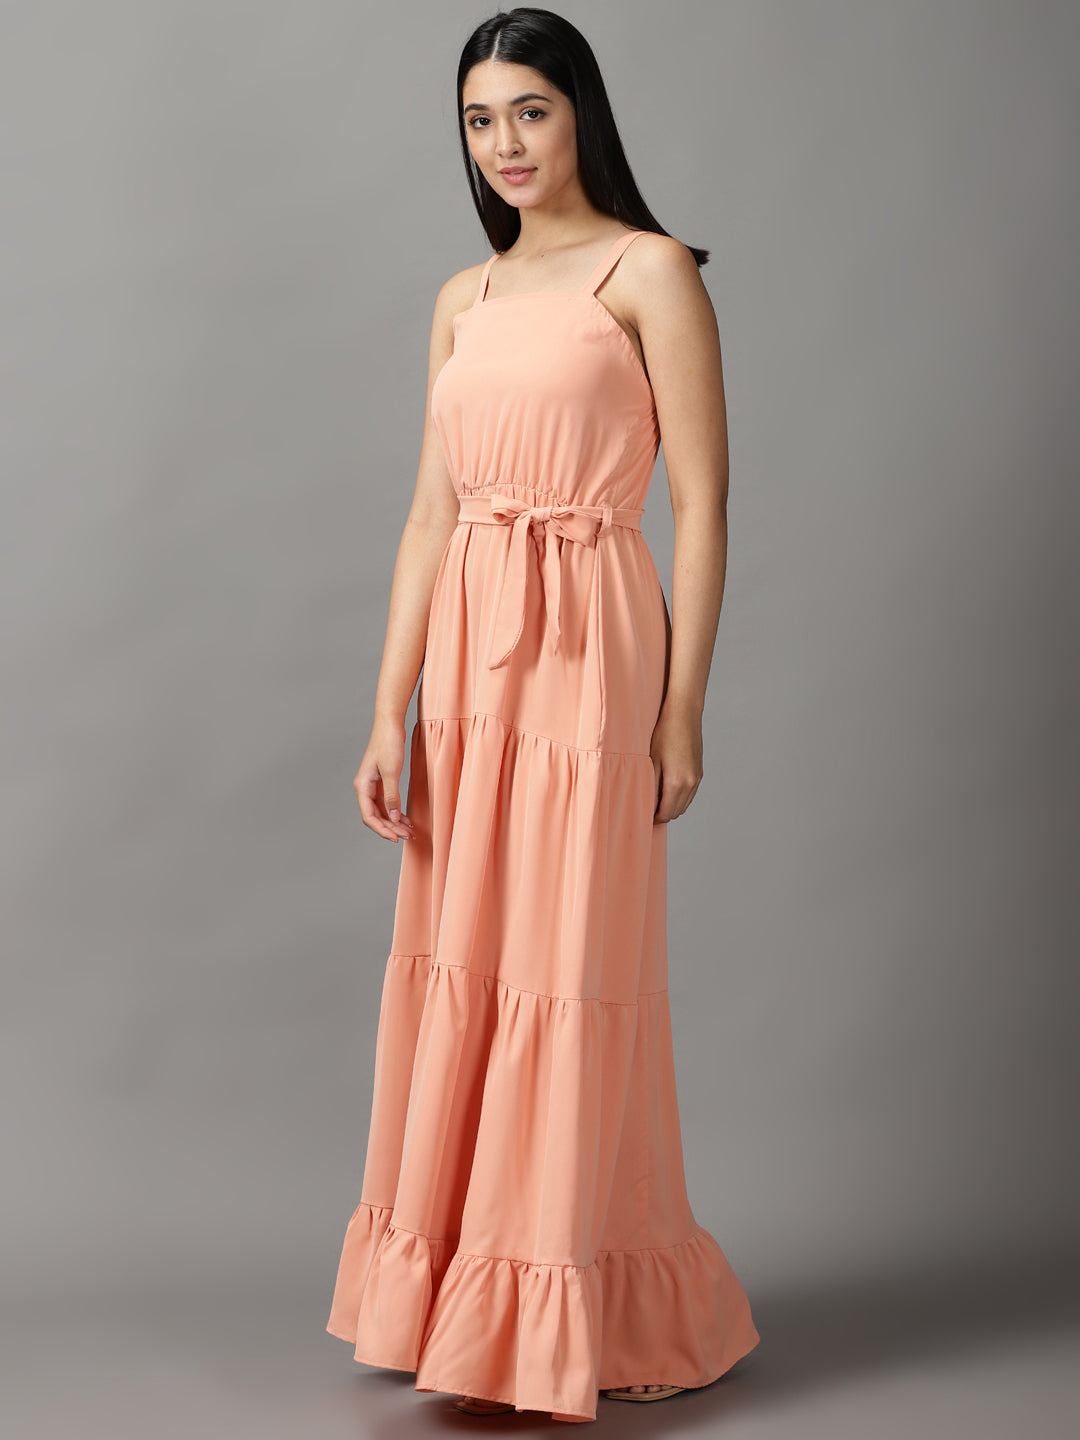 Women's Peach Solid Fit and Flare Dress